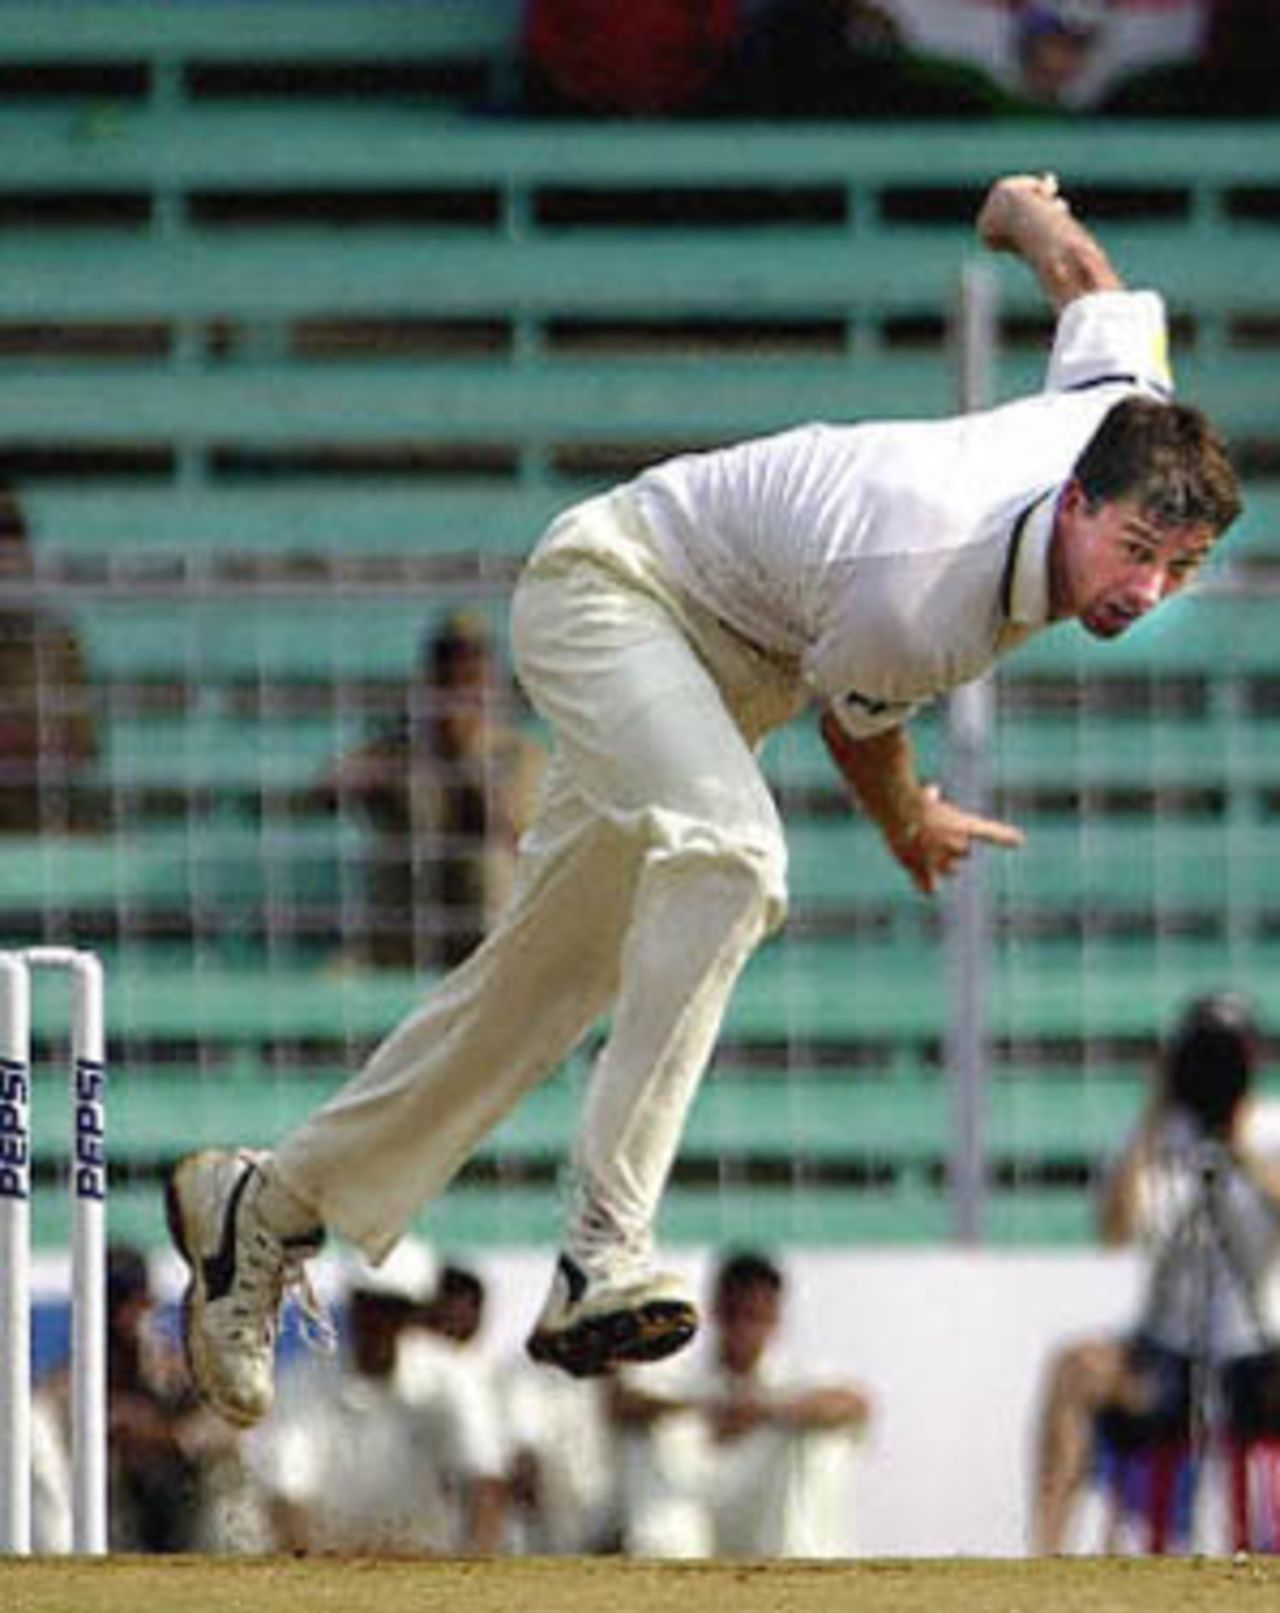 Australian pace bowler Glenn McGrath bowls to Indian opener Shiv Sundar Das (not in the picture) on the first day of the first test  match between Indian and Australia in Wankhade stadium in Bombay 27 February 2001. McGrath took an early wicket of India's Sadagopan Ramesh as India were struggling at 54 for 4 after less than two hours of play.